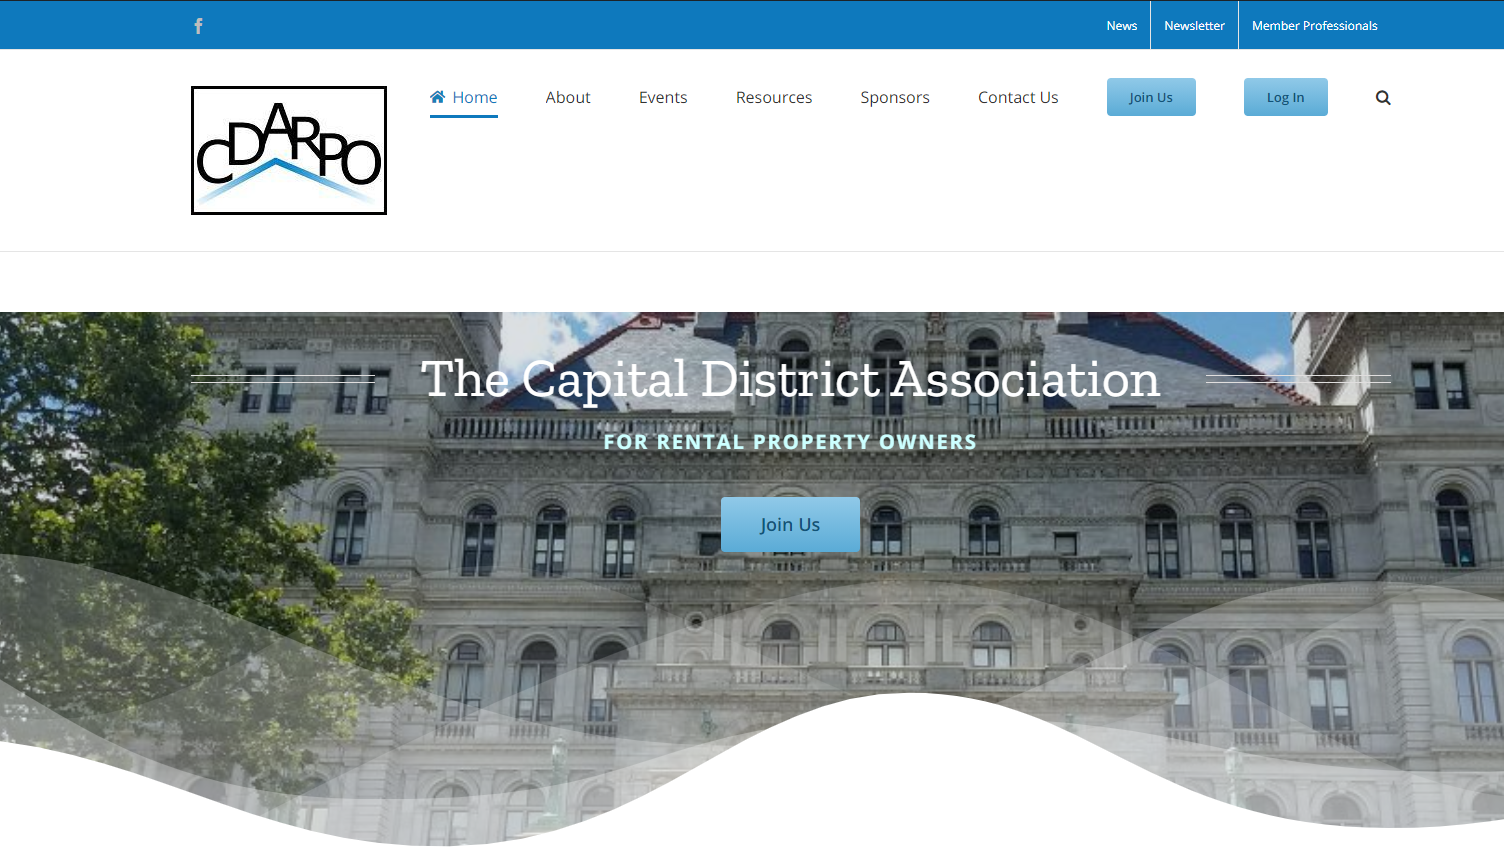 Capital District Association of Property Owners